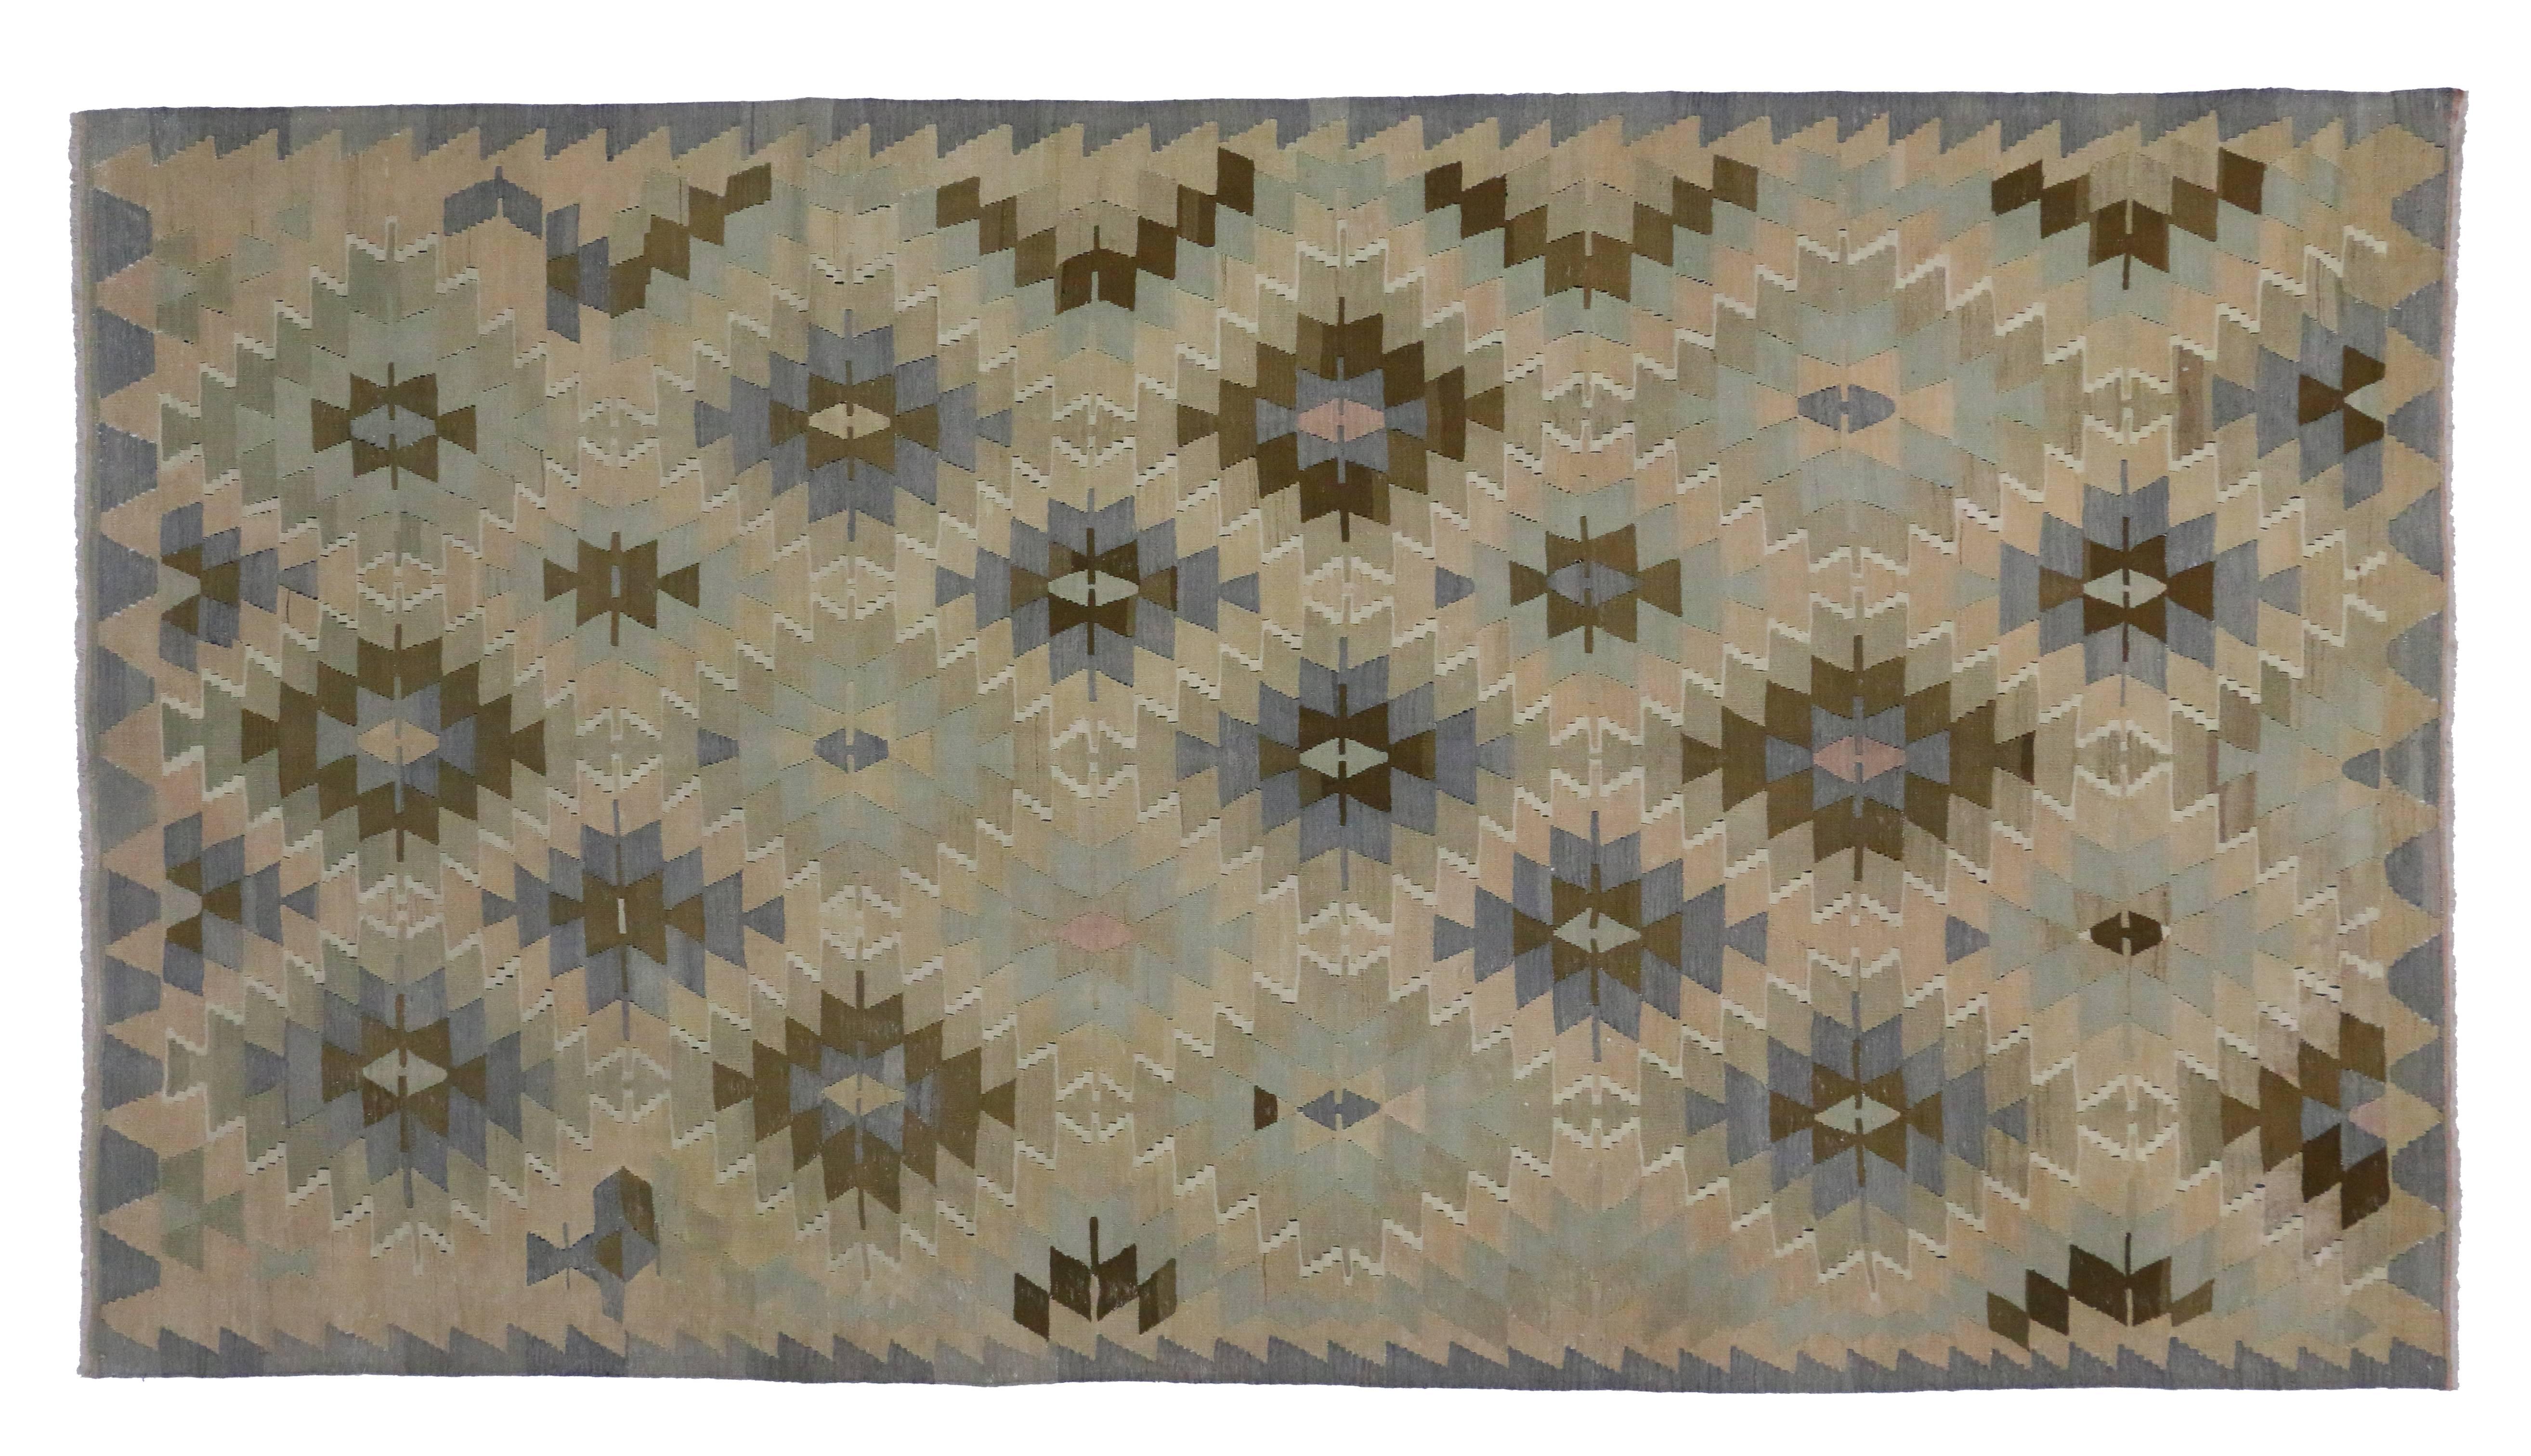 51235, vintage Turkish Kilim rug with southwestern-coastal chic style. This hand-woven wool vintage Turkish kilim rug features an all-over geometric motif of serrated diamonds filled with fused triangles. Rendered in variegated colors and cool